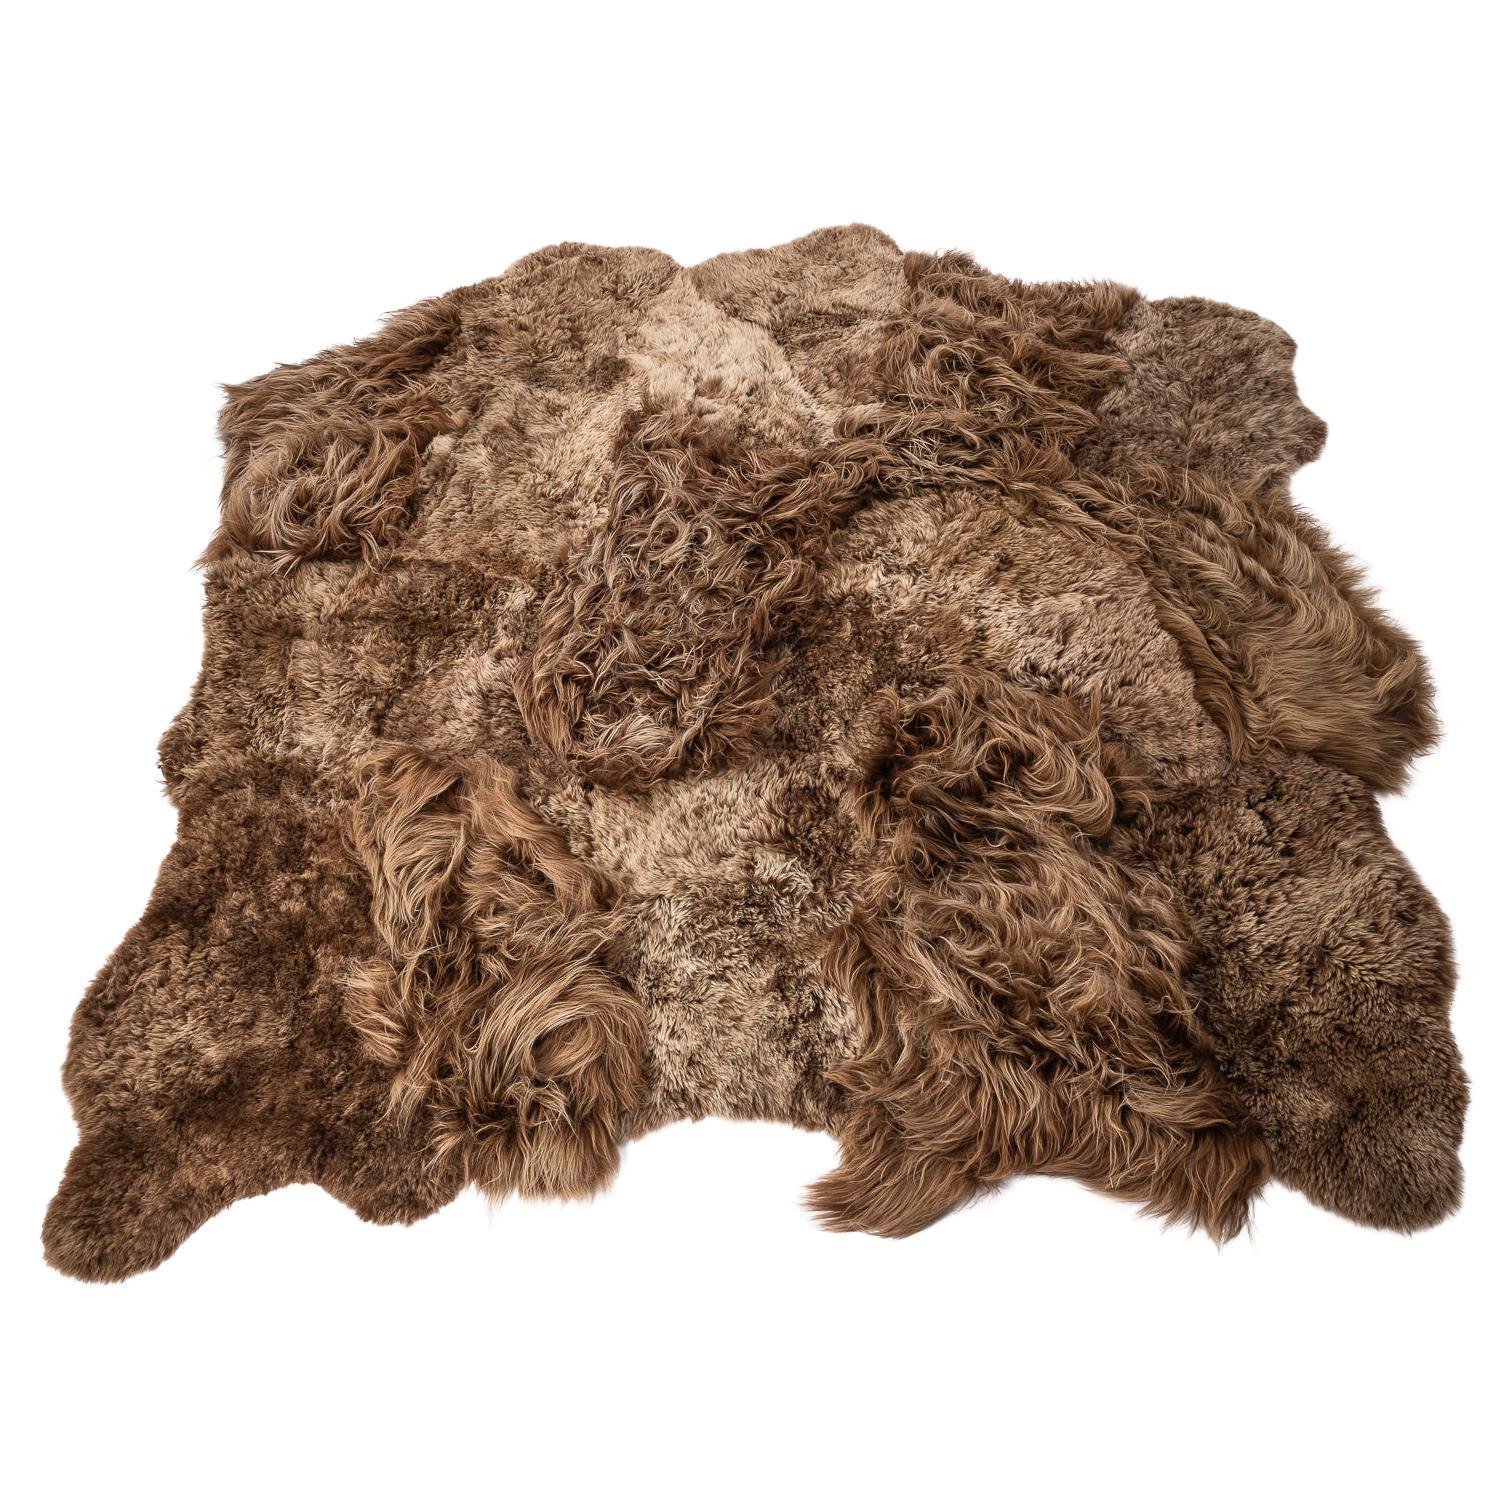 Fully Lined Sheepskin and Lambskin Brown Rug, Khan, Handmade in France For Sale